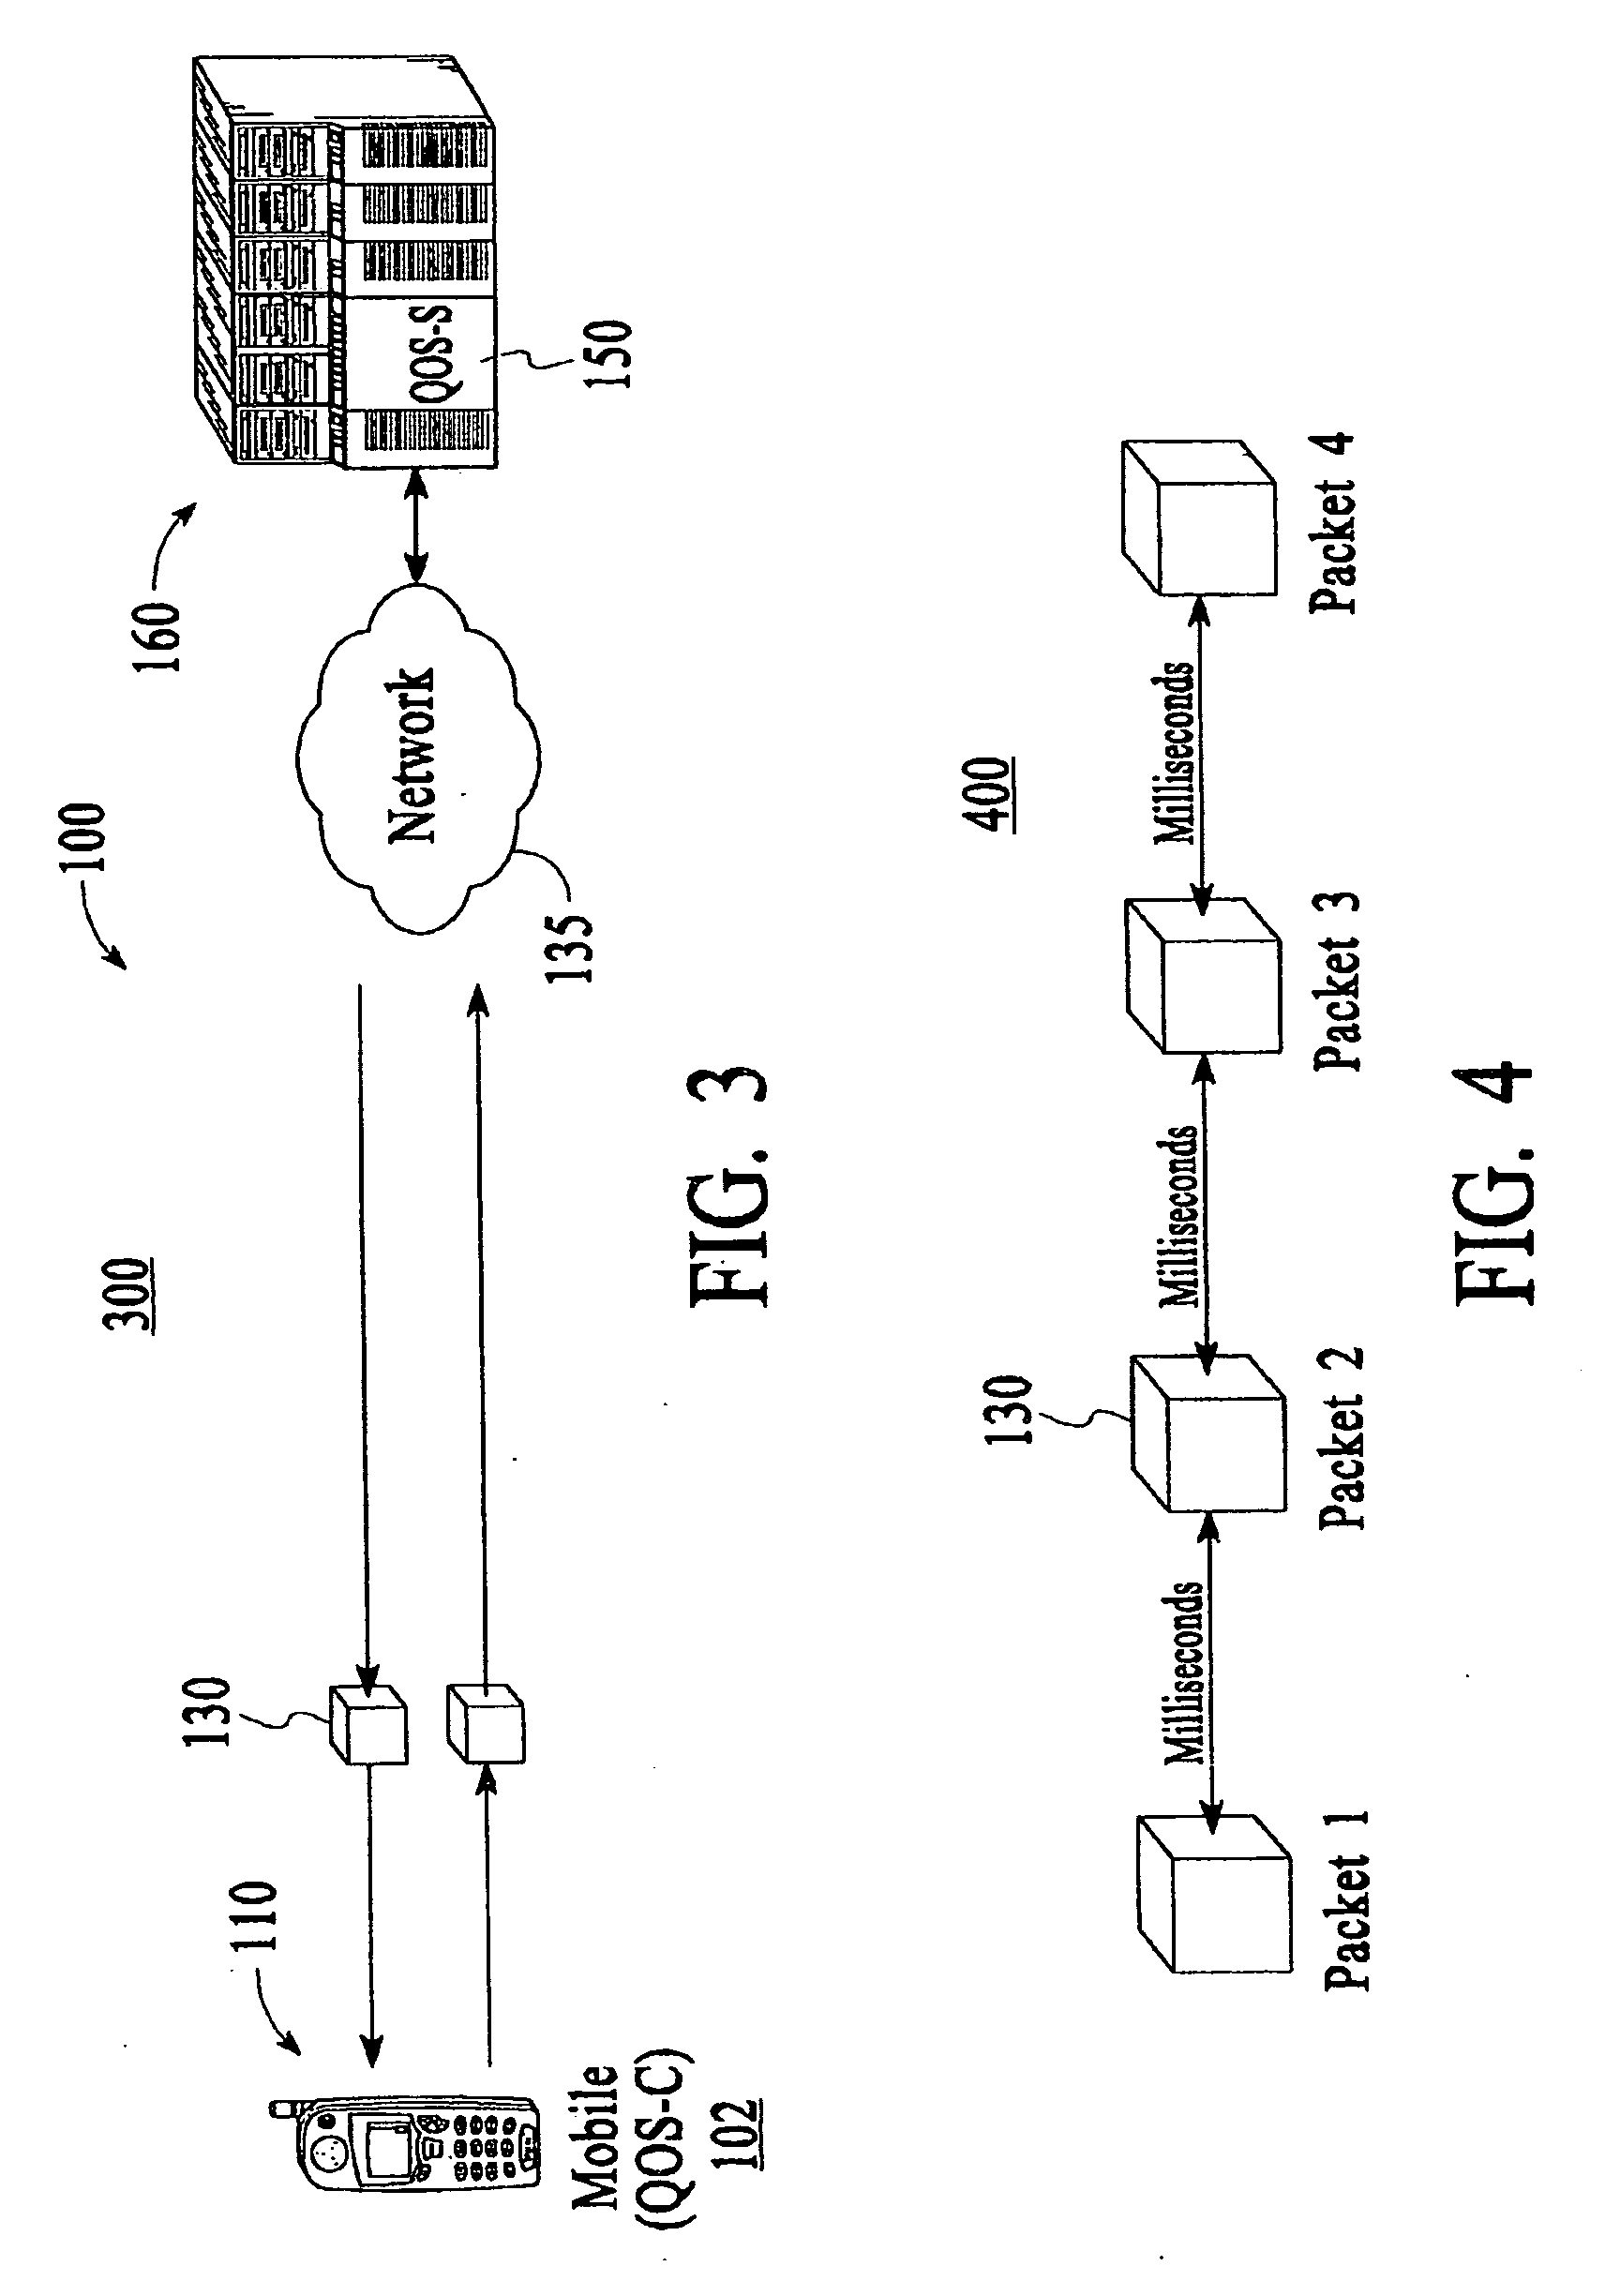 Method and system for Quality of Service (QoS) monitoring for wireless devices